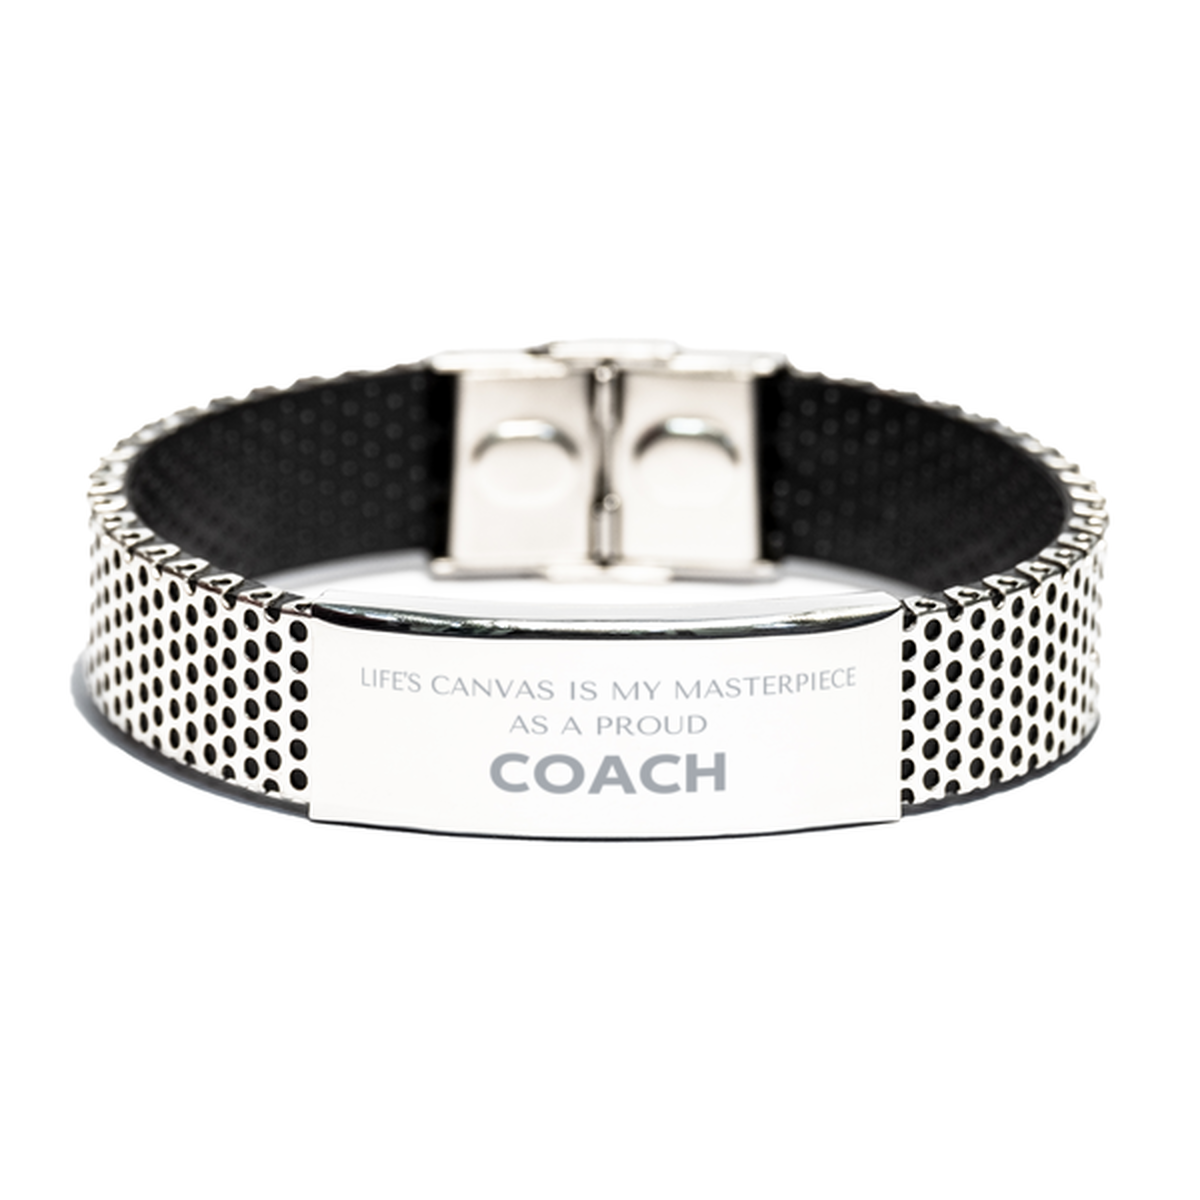 Proud Coach Gifts, Life's canvas is my masterpiece, Epic Birthday Christmas Unique Stainless Steel Bracelet For Coach, Coworkers, Men, Women, Friends